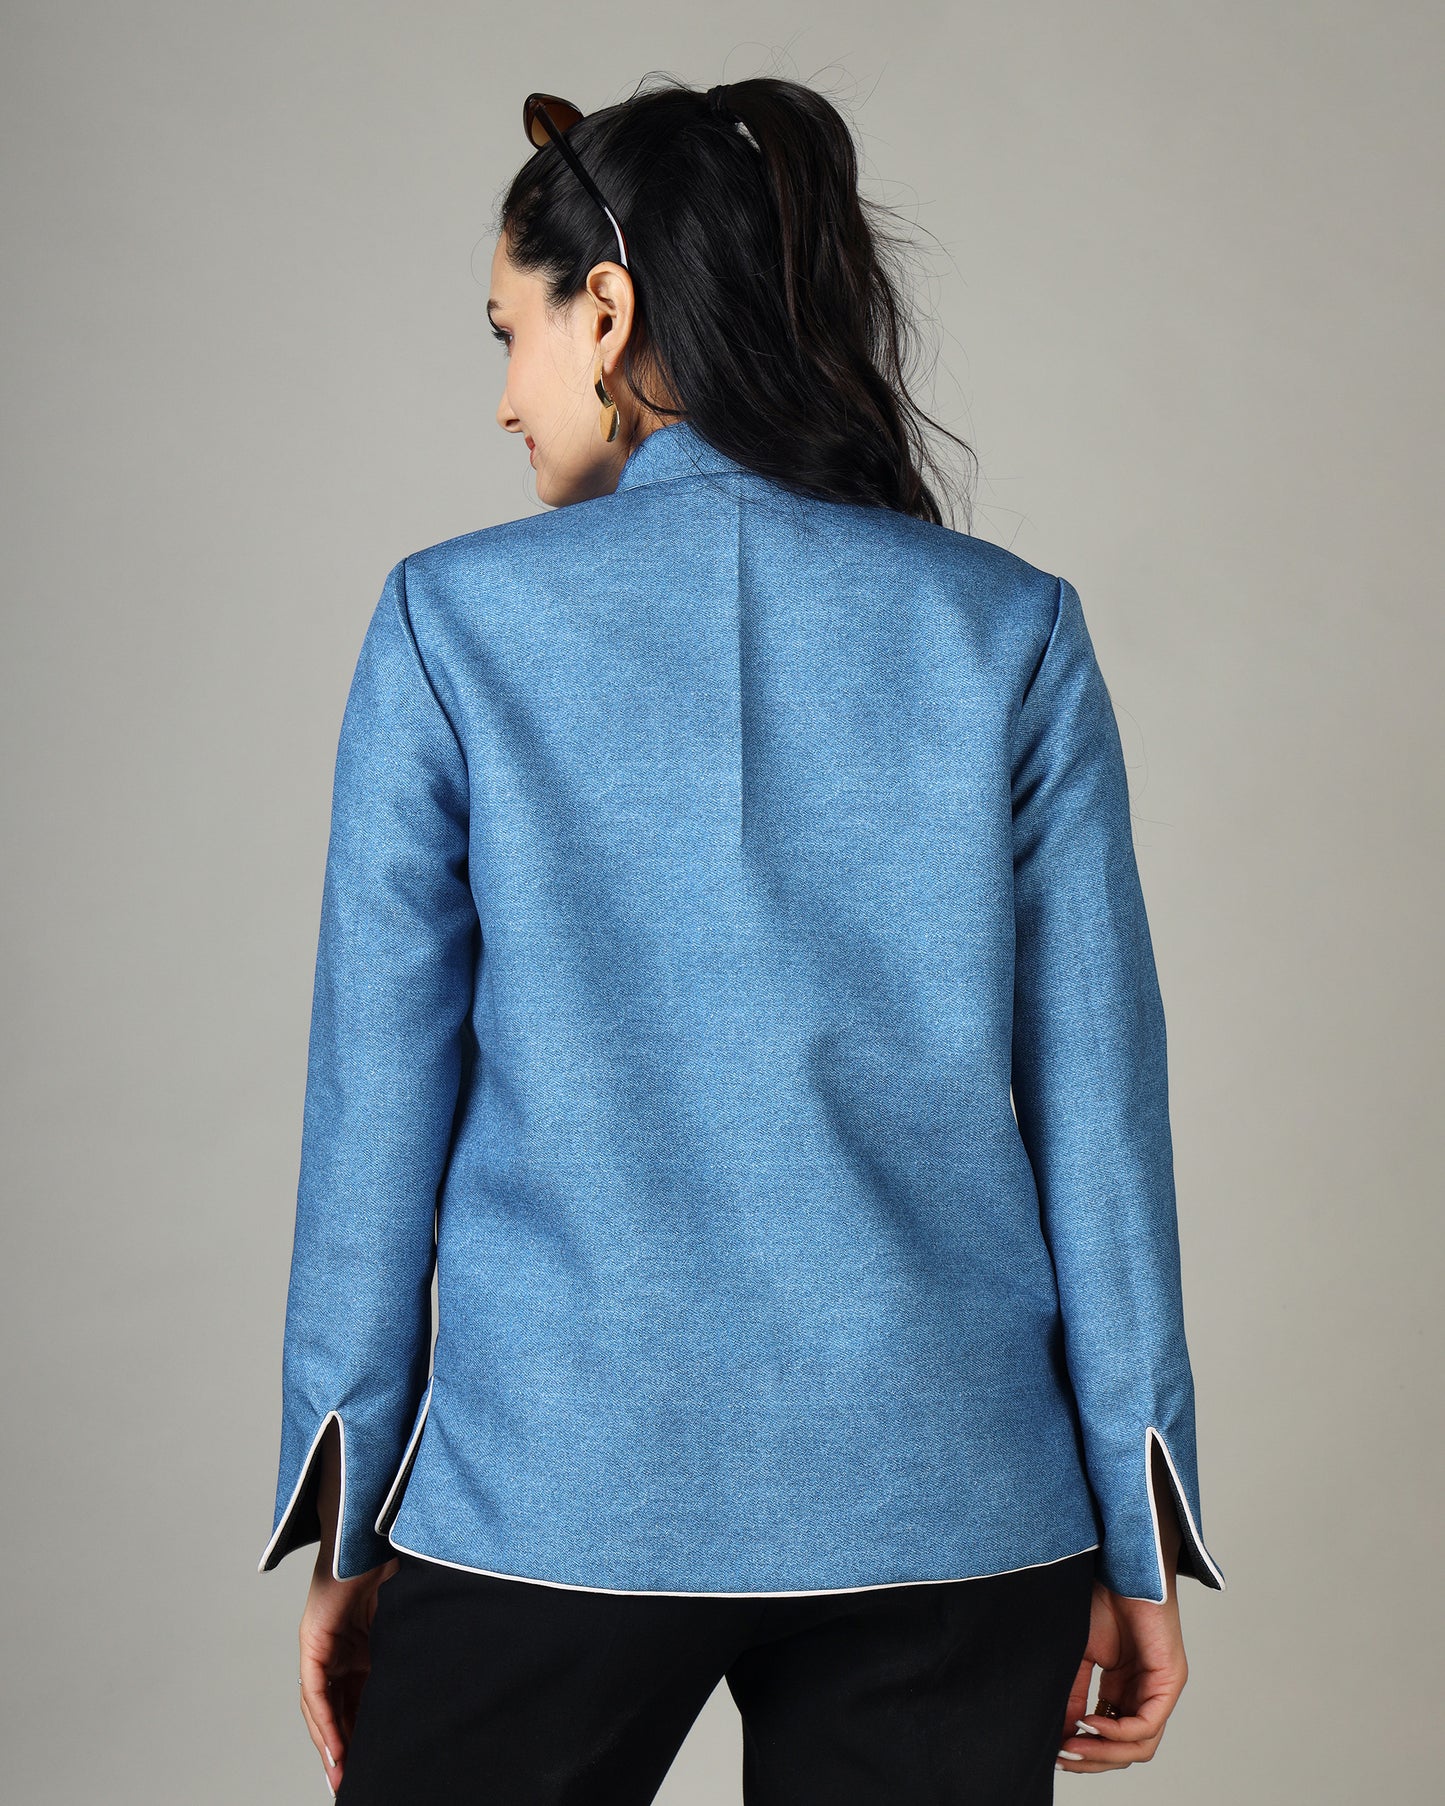 Slay the Streets in Our Denim-Inspired Women's Jacket